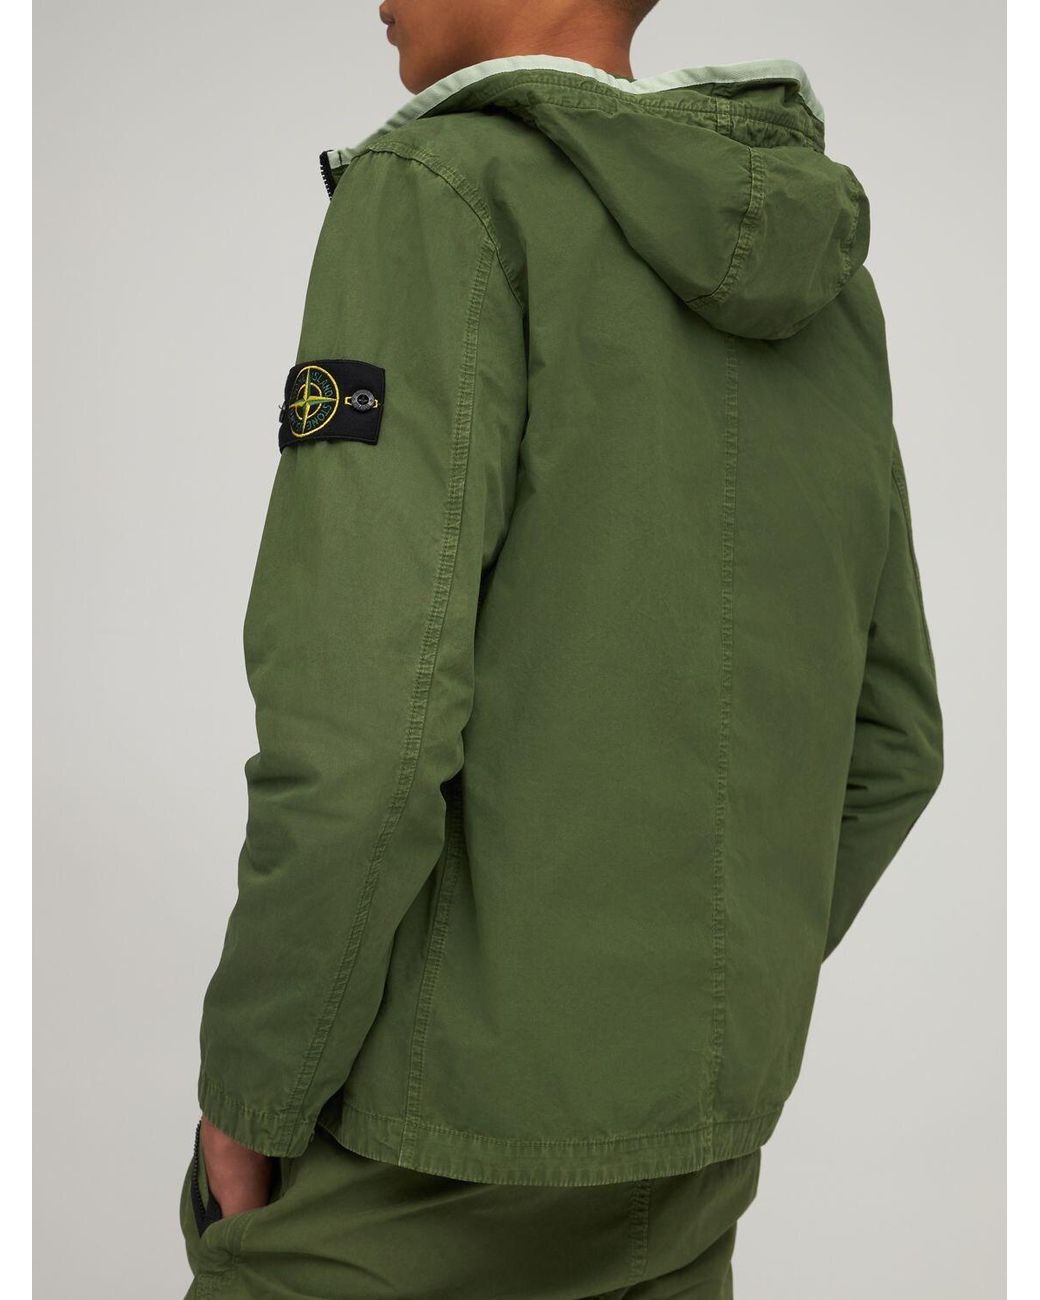 Stone Island Zipped Canvas Overshirt W/ Hood in Green for Men | Lyst